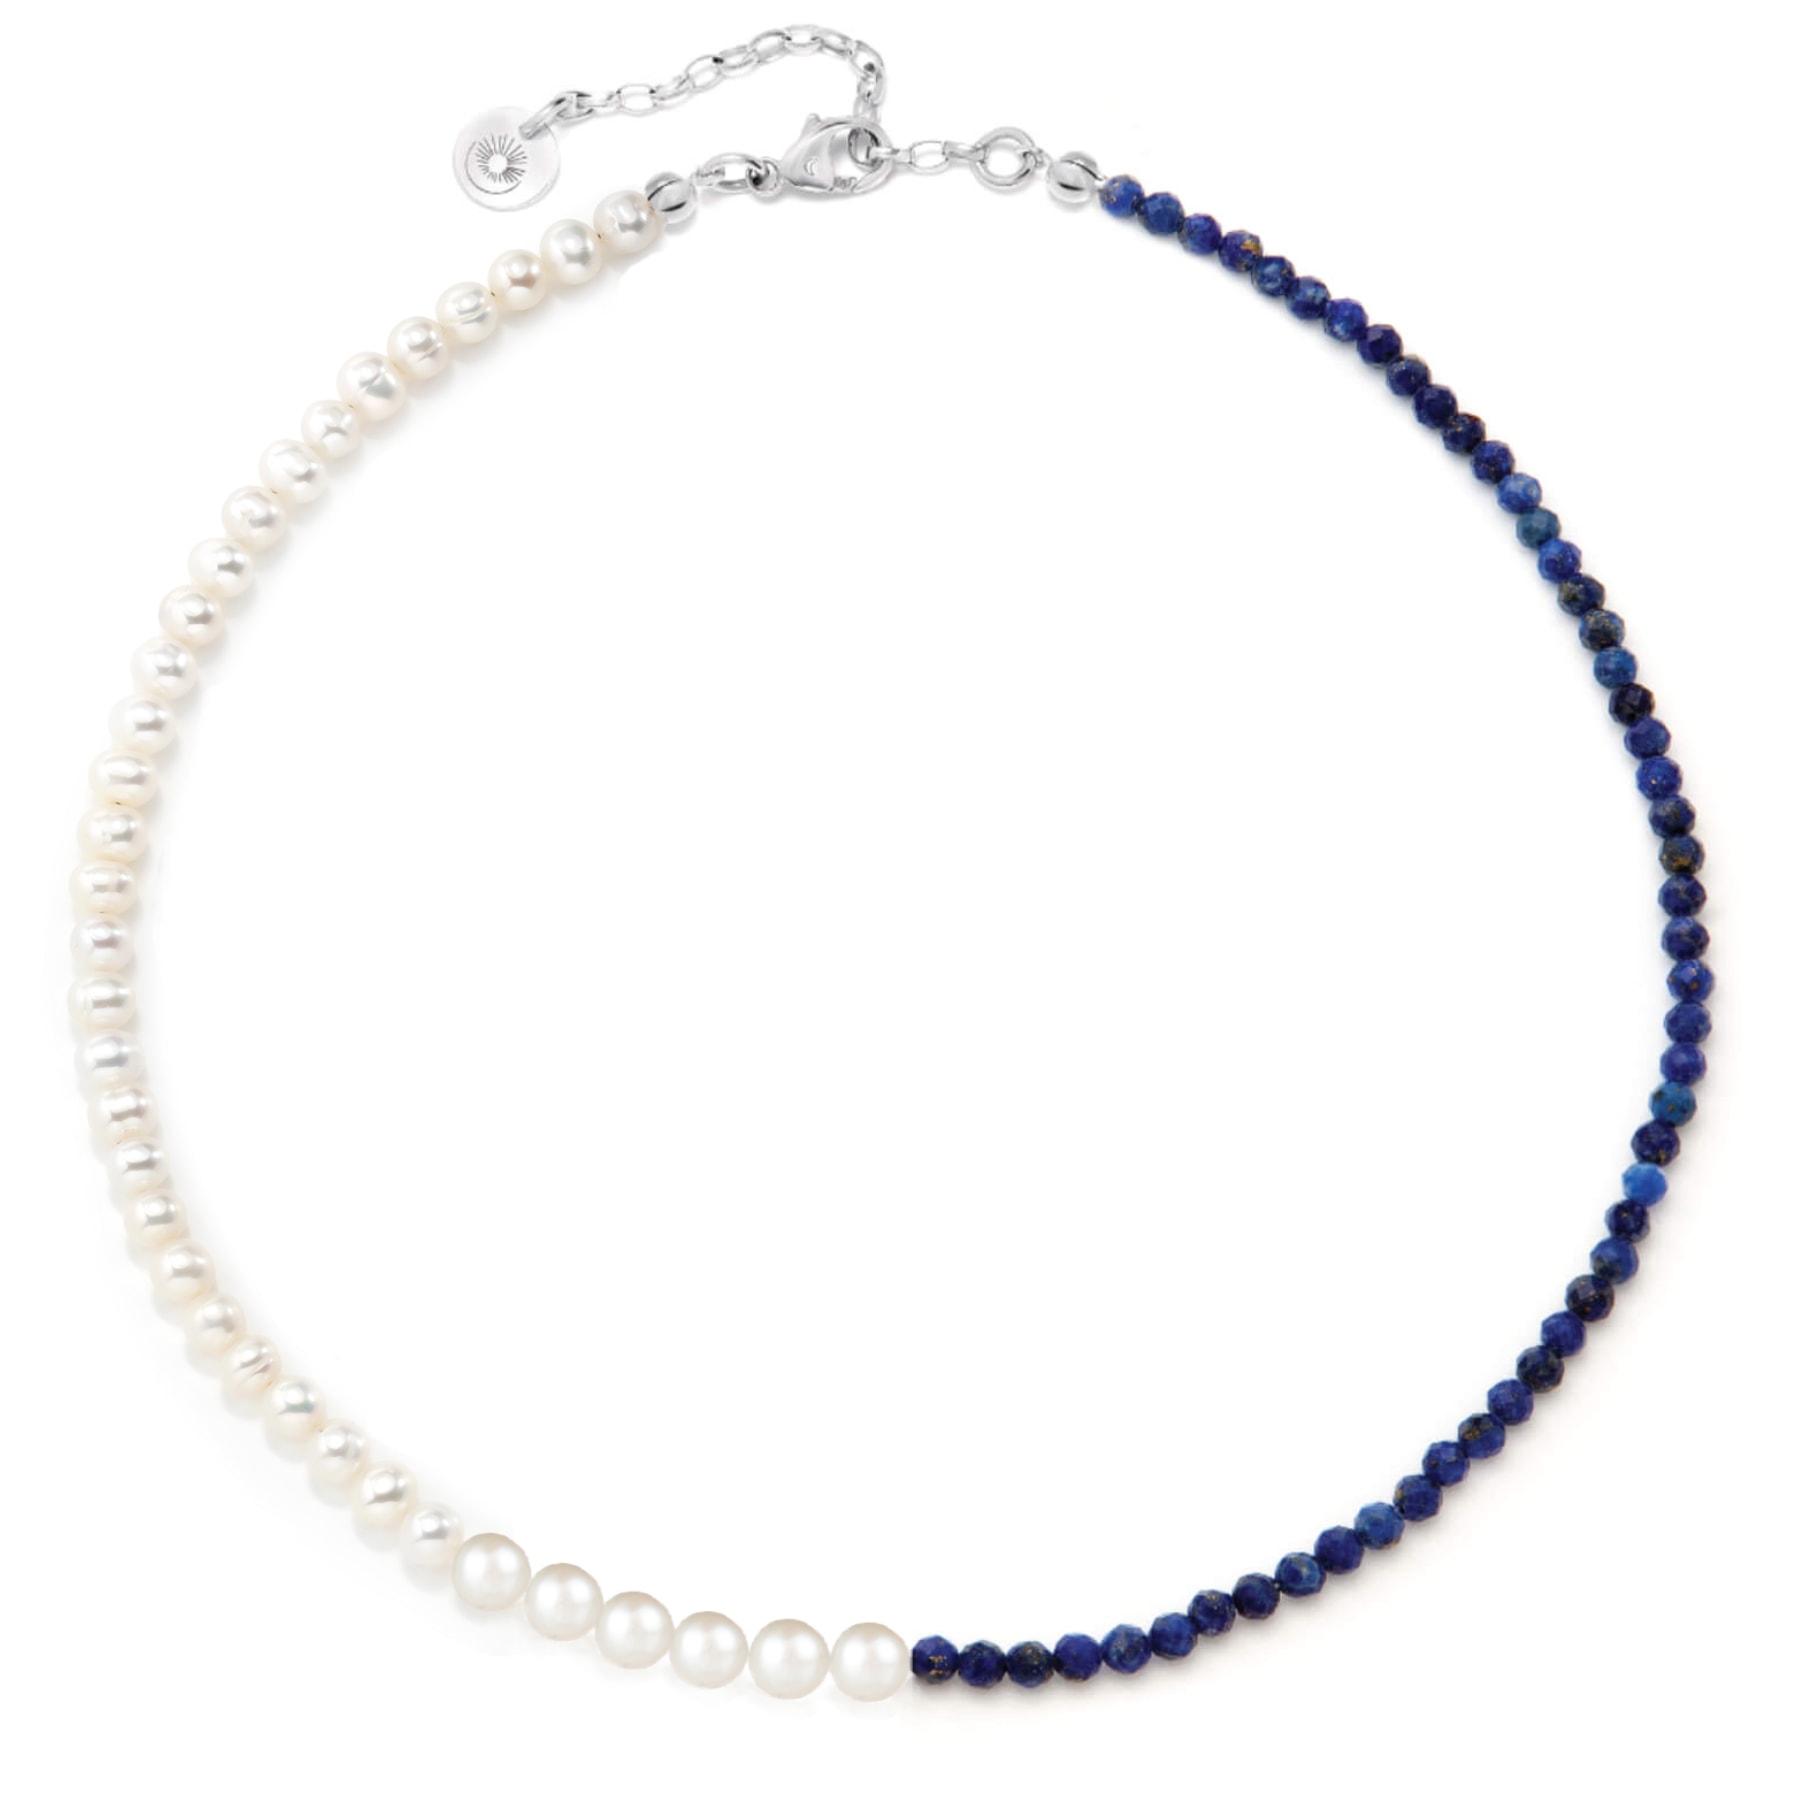 Pearl necklace with blue stones